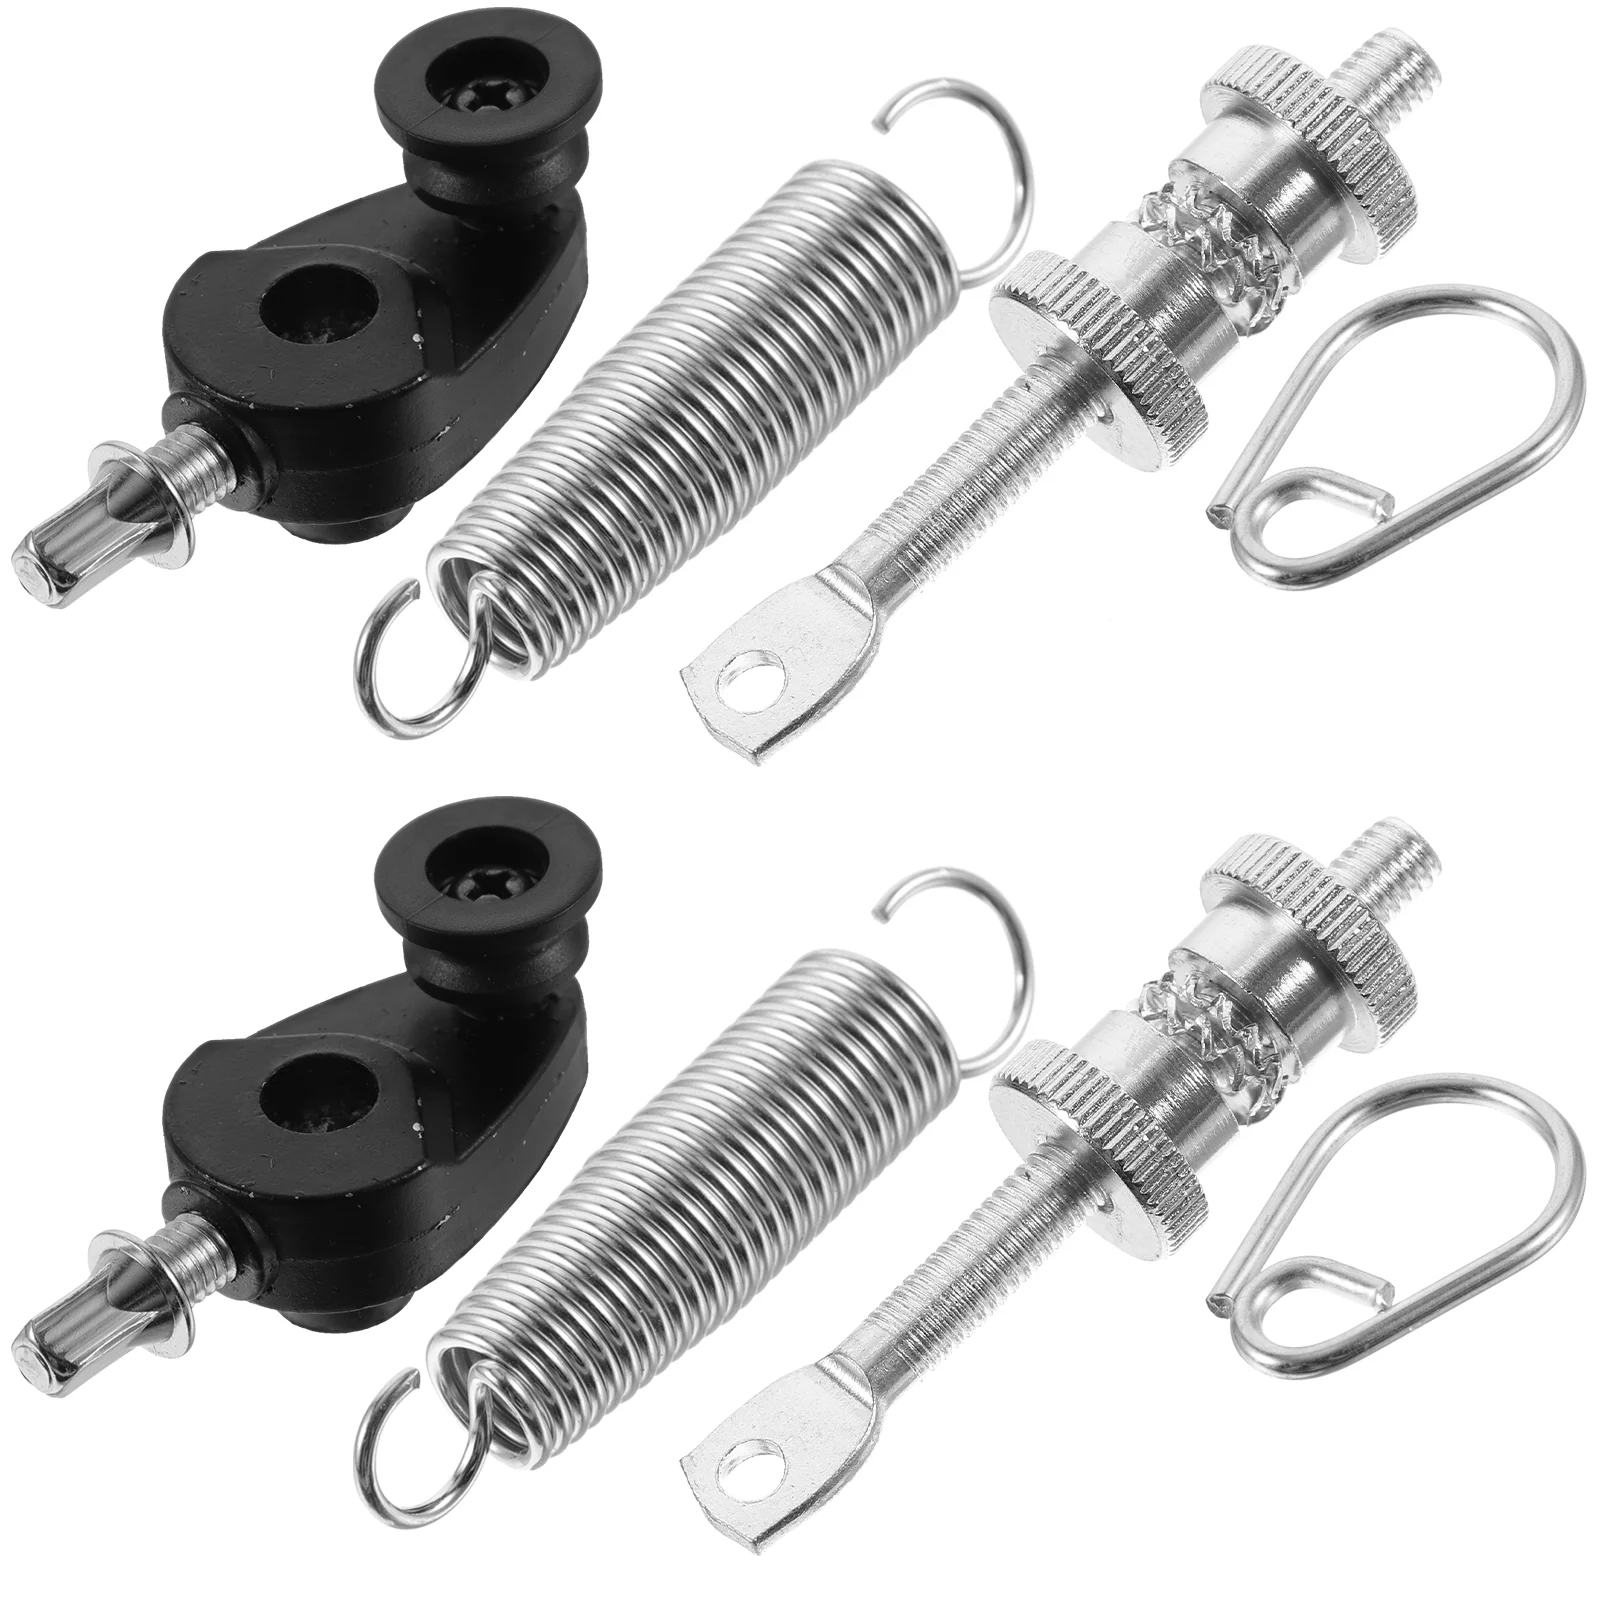 

2 Pcs Jazz Drum Kit Special Hammer Spring Pedal 2pcs (a Complete Set) Part Sprung Professional Foot Metal Parts Springs